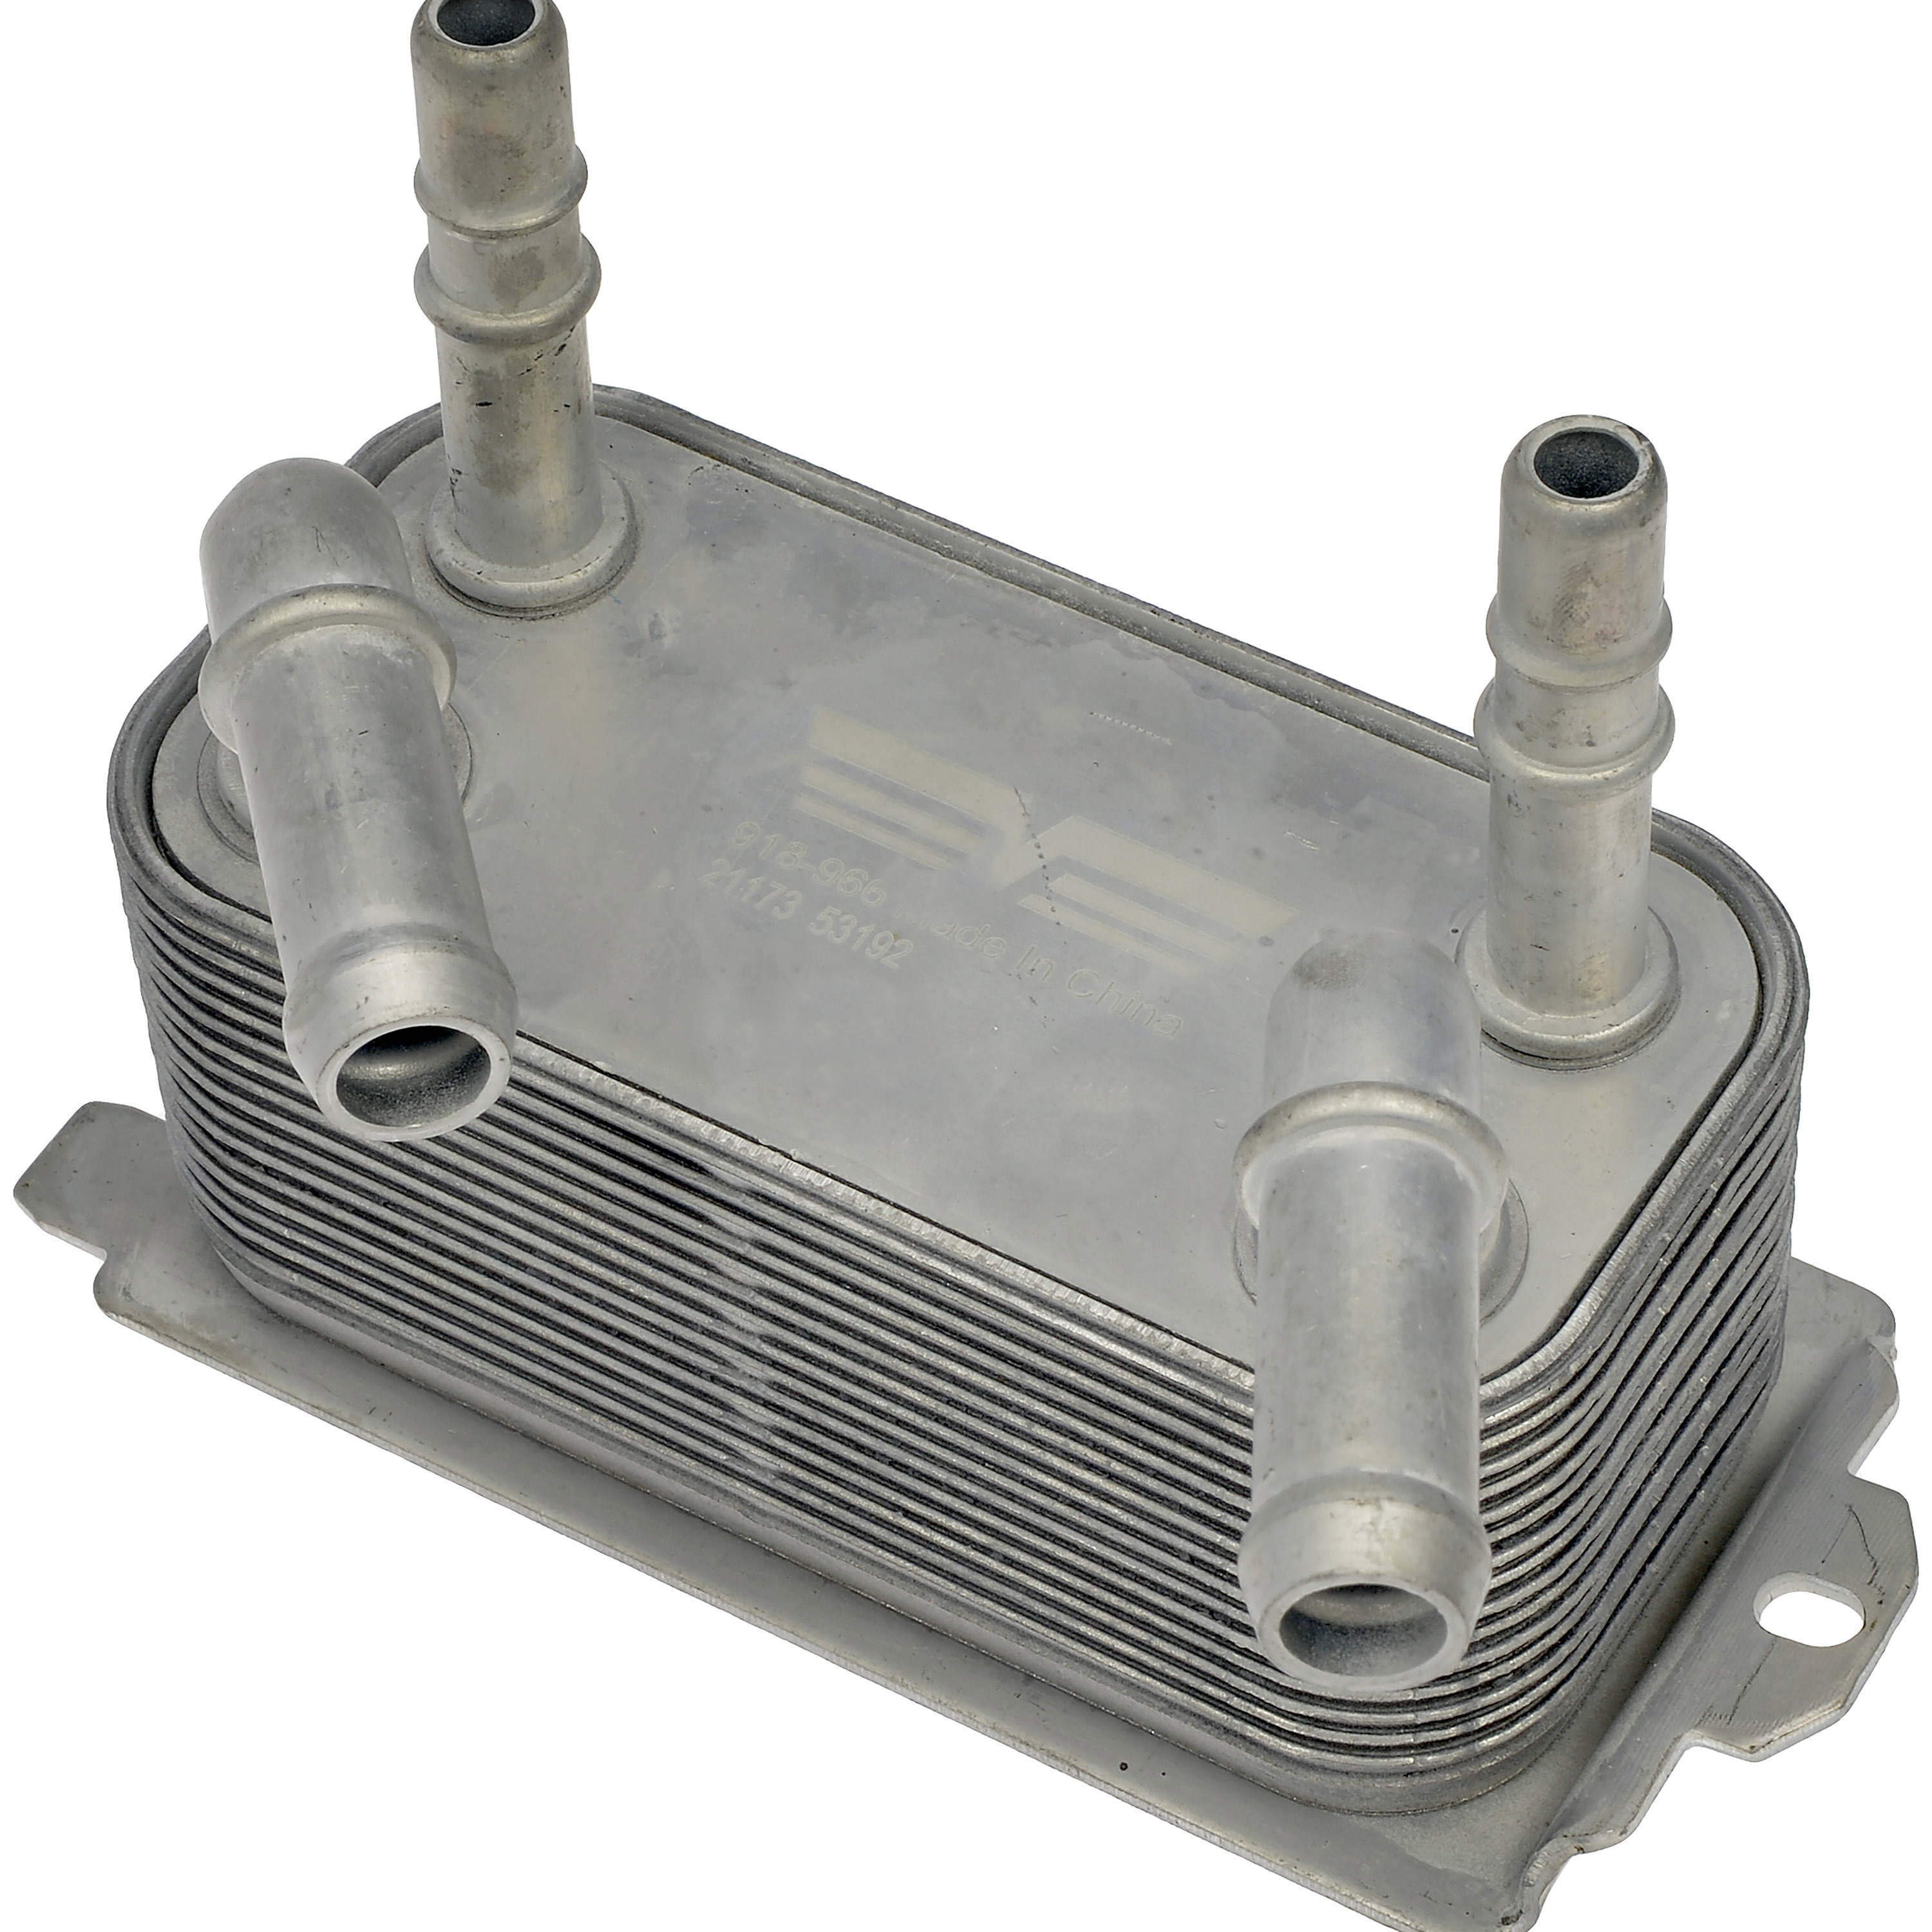 Dorman 918-966 Automatic Transmission Oil Cooler for Specific Ford Models - image 1 of 4